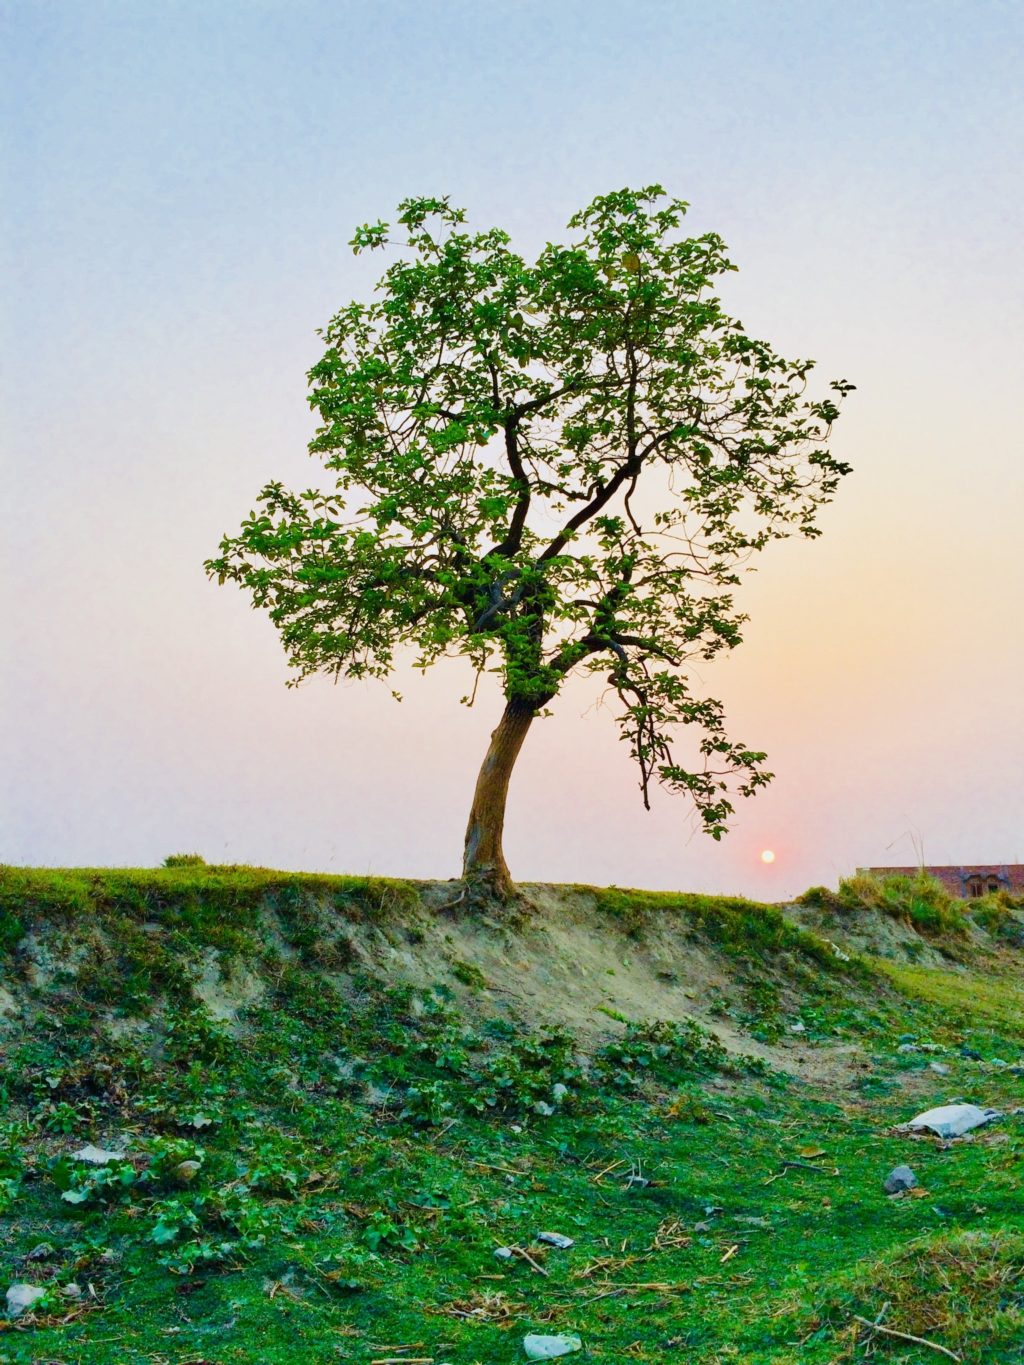 A tree grows on a grassy hillside in front of a light sunrise.